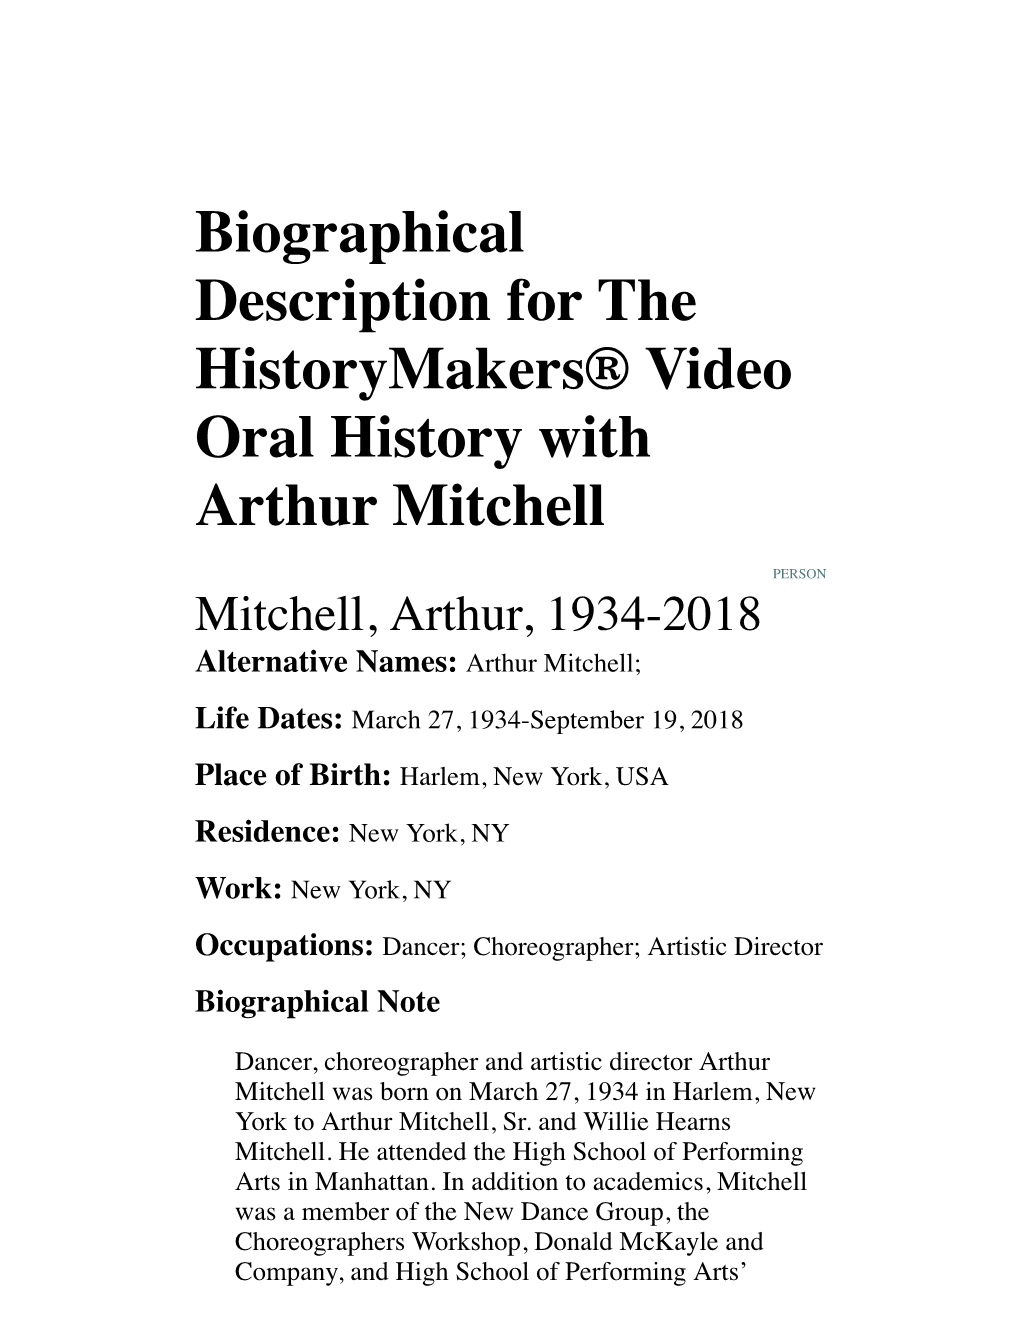 Biographical Description for the Historymakers® Video Oral History with Arthur Mitchell